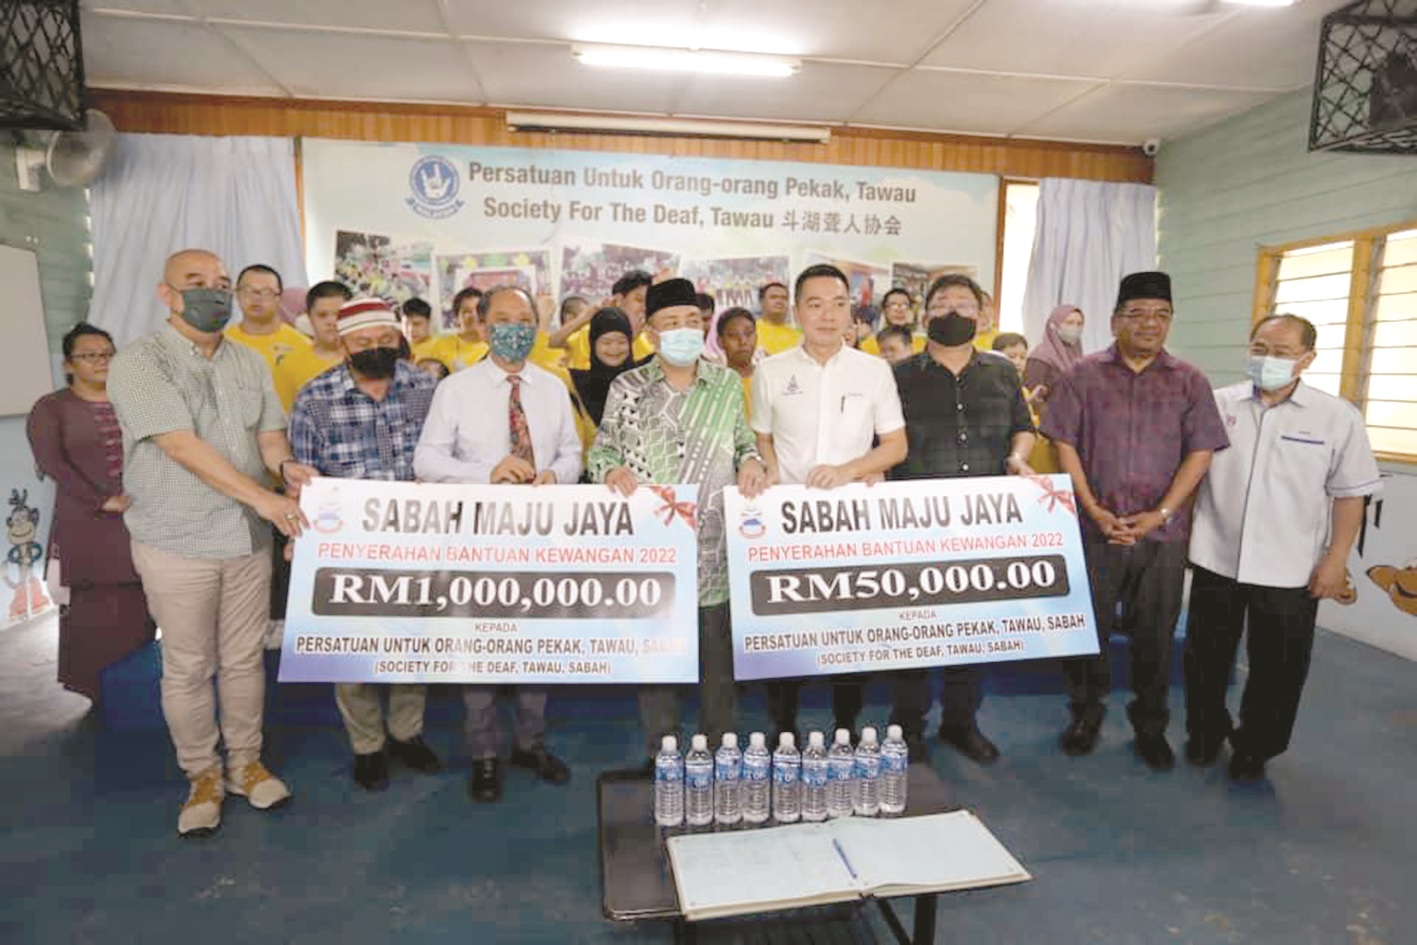 RM2 million boost for hearing impaired